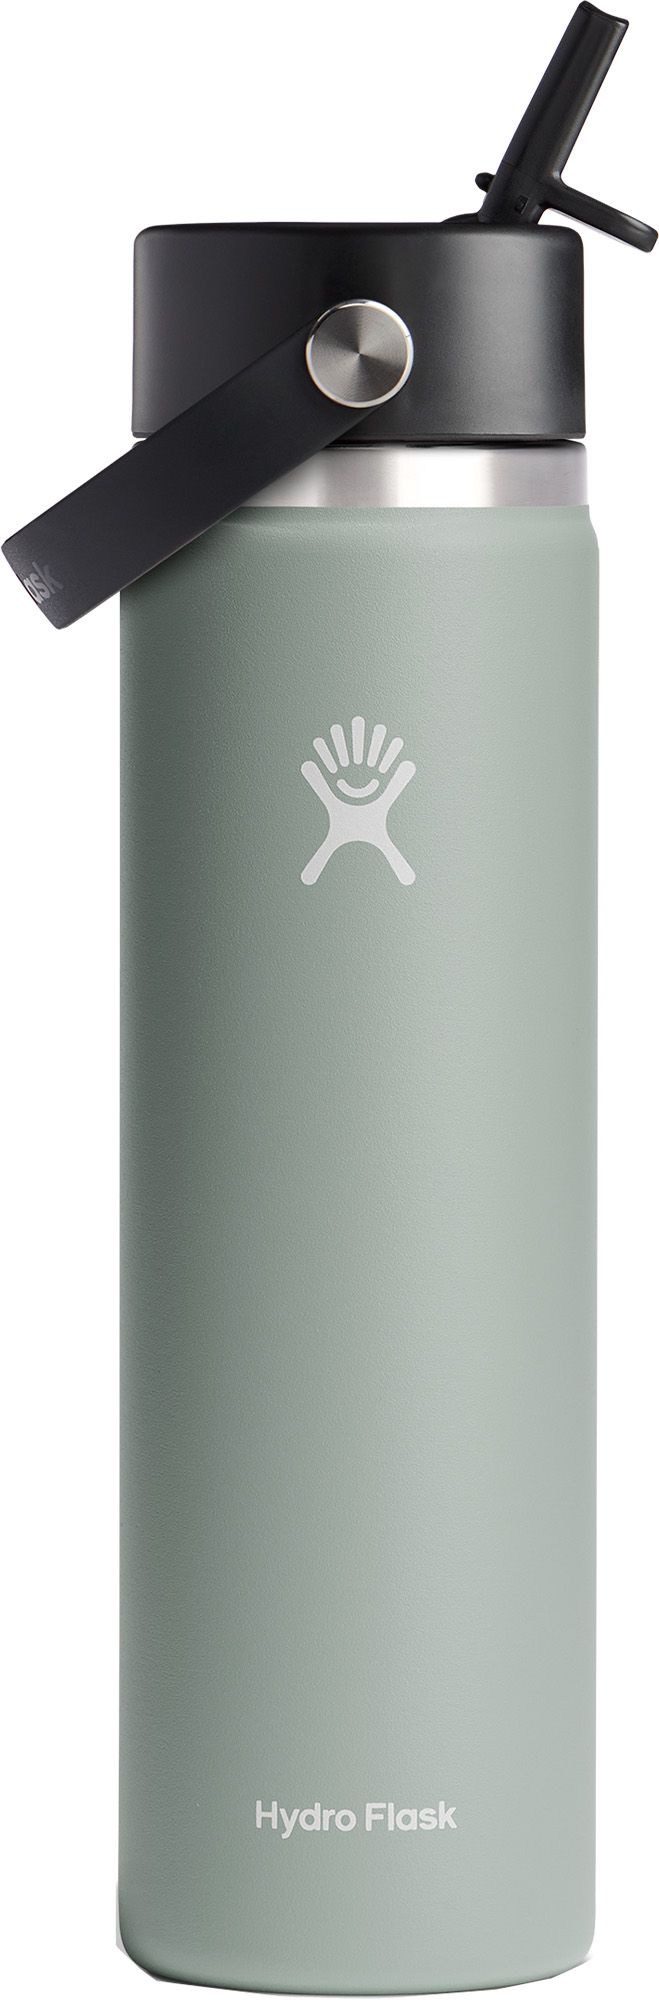 Photos - Other goods for tourism Hydro Flask 24 oz. Wide Mouth Bottle with Flex Straw Cap, Agave 23HFLU24ZW 